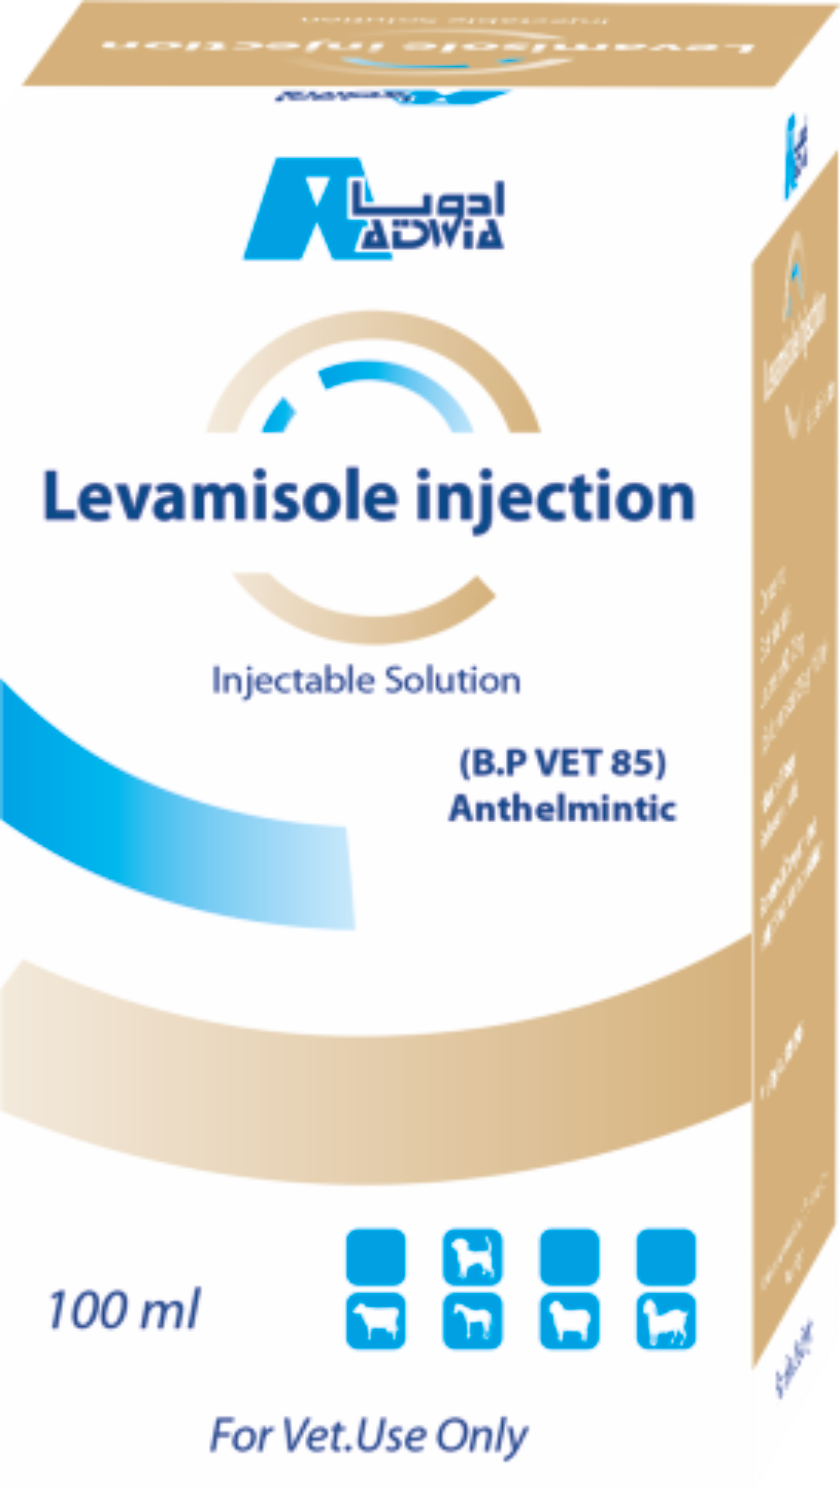 image for Levamisole injection